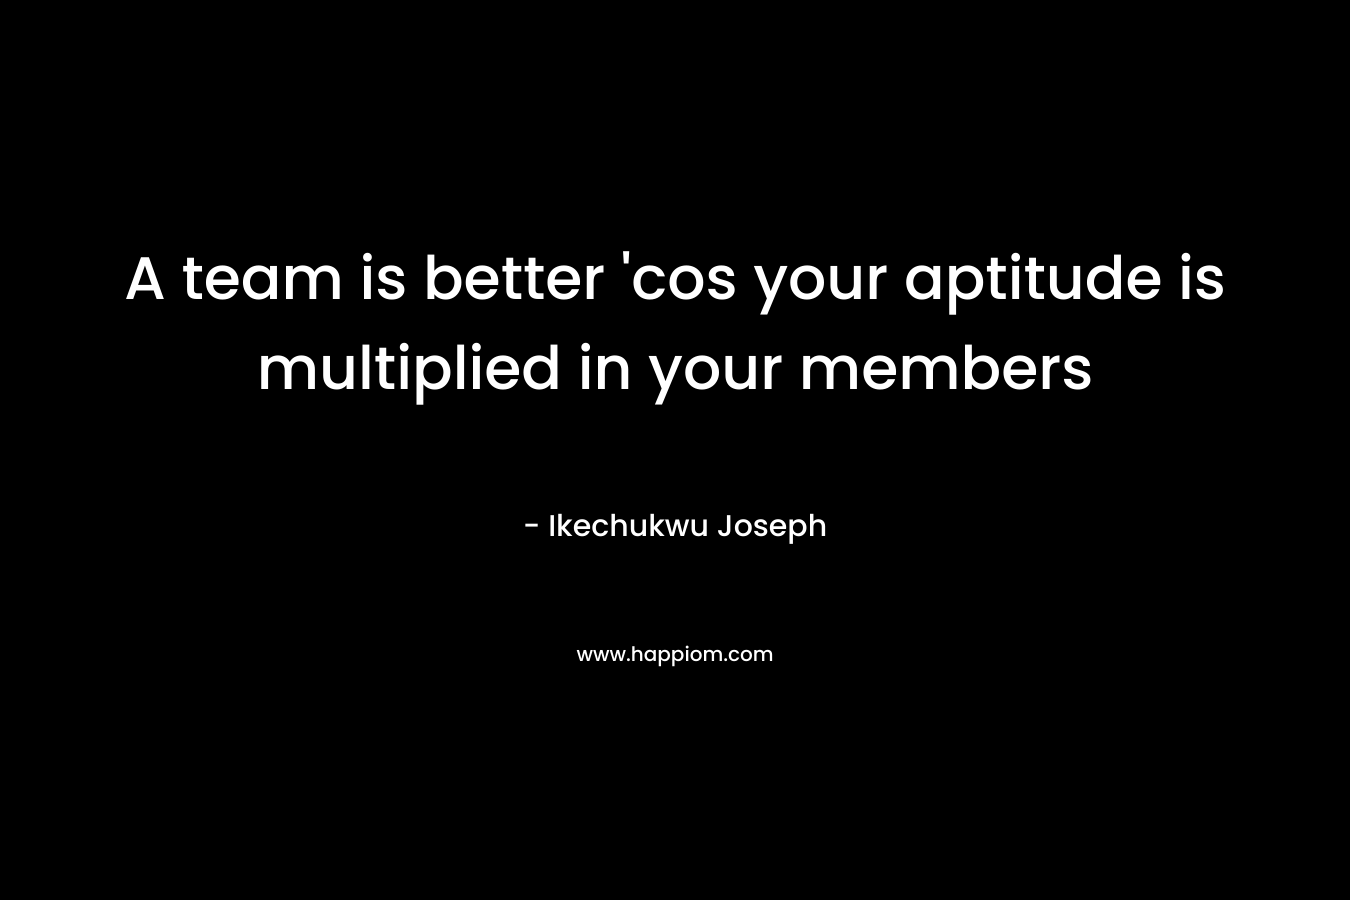 A team is better 'cos your aptitude is multiplied in your members